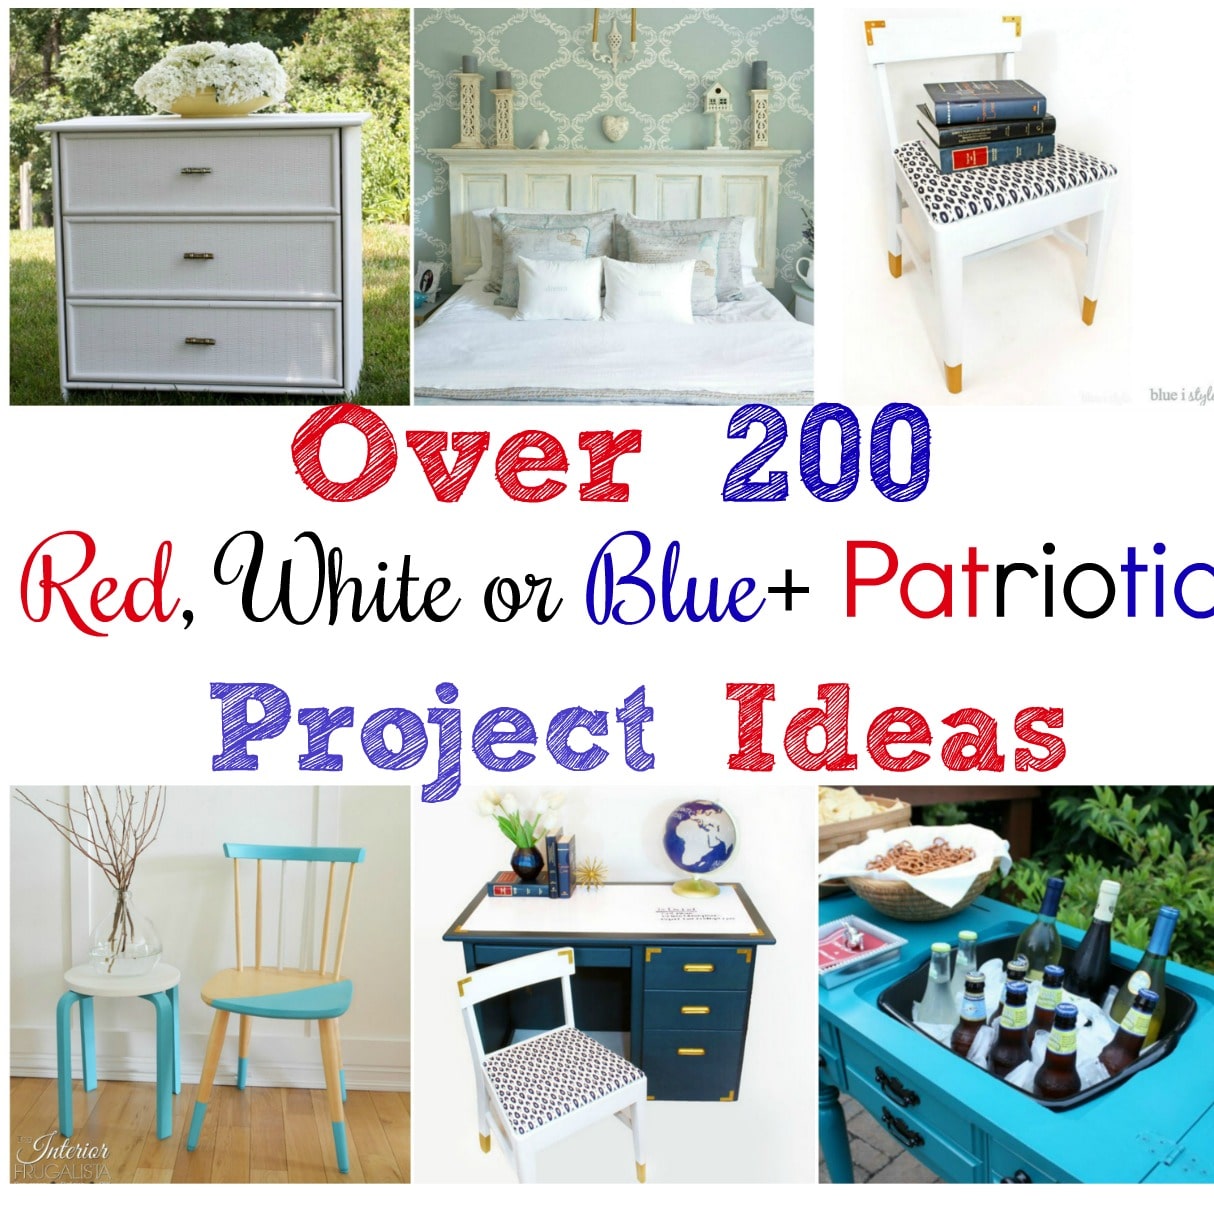 Over 200 Project Ideas in Red, White or Blue + Patriotic